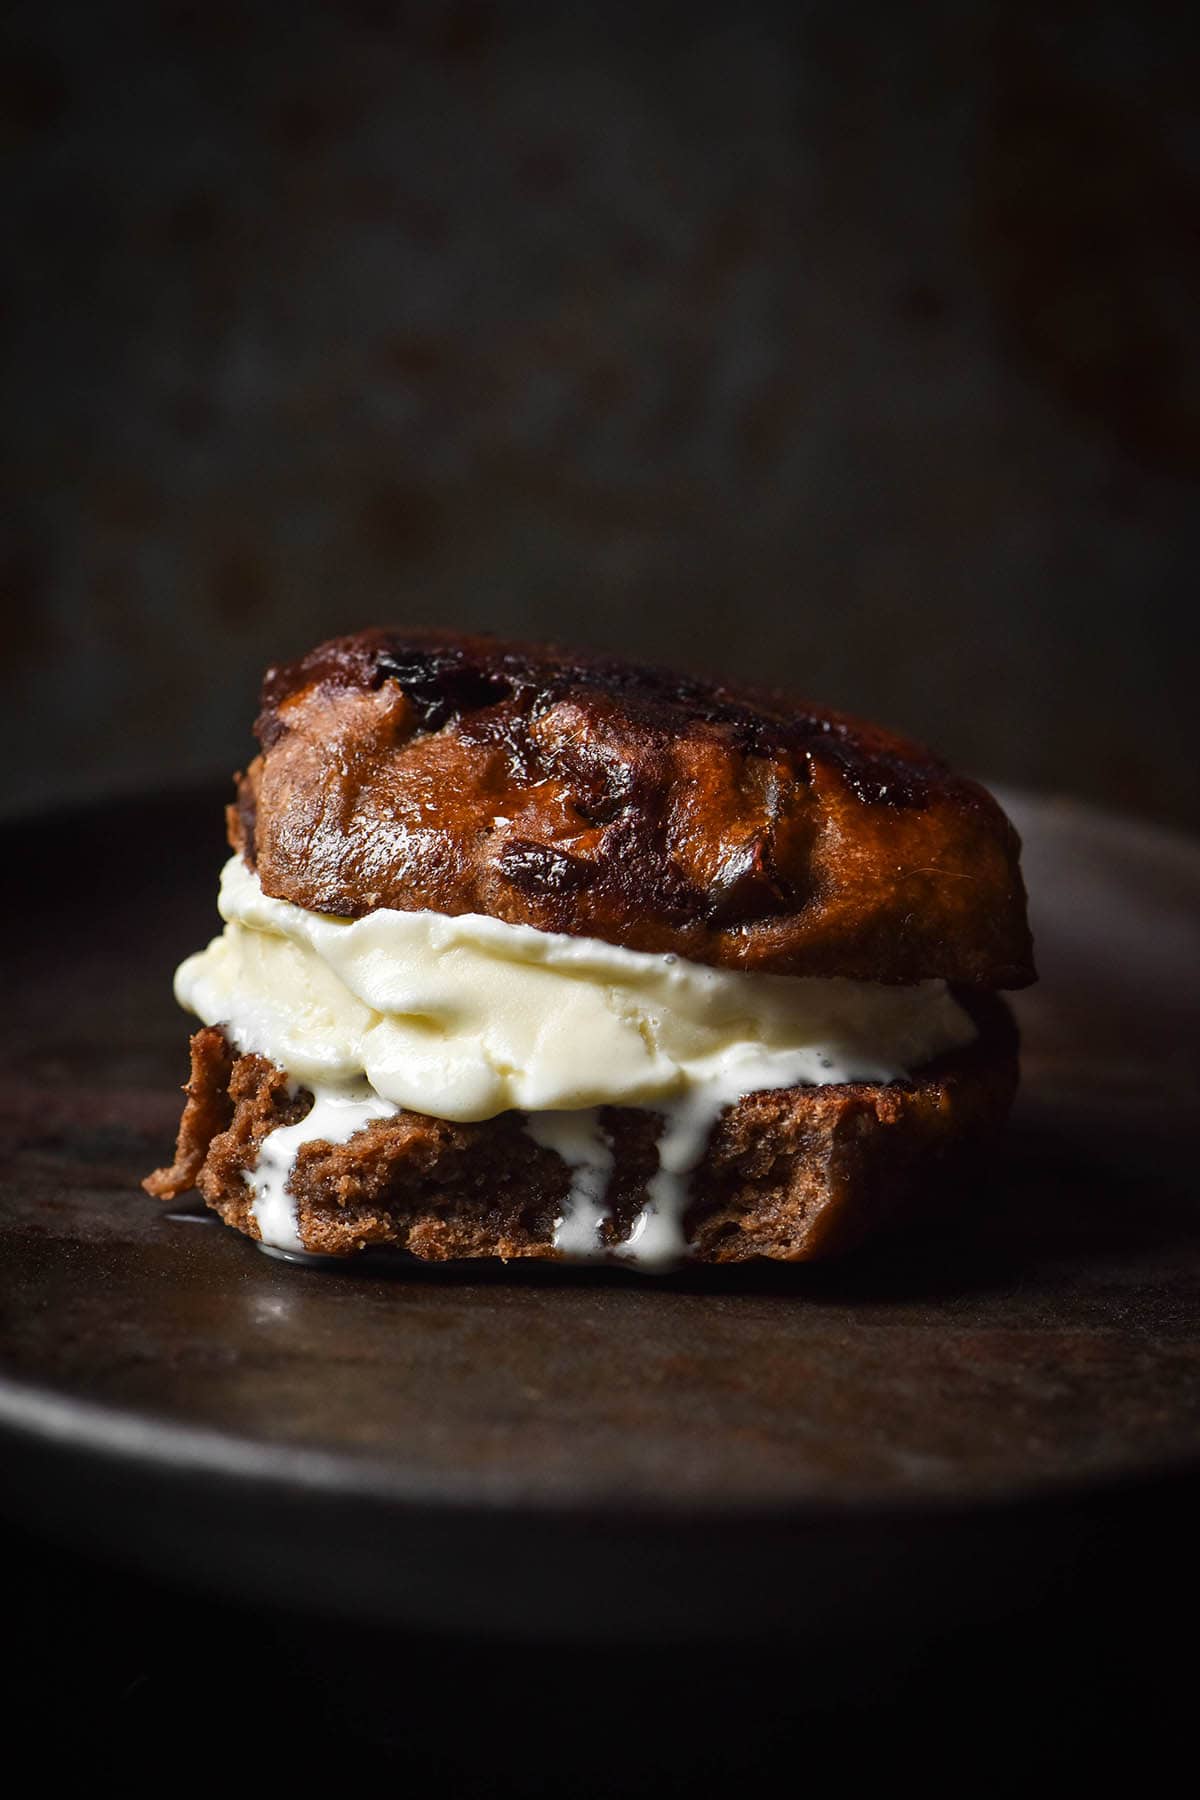 A moody side on image of a gluten free hot cross bun toasted and sandwiched with vanilla ice cream.